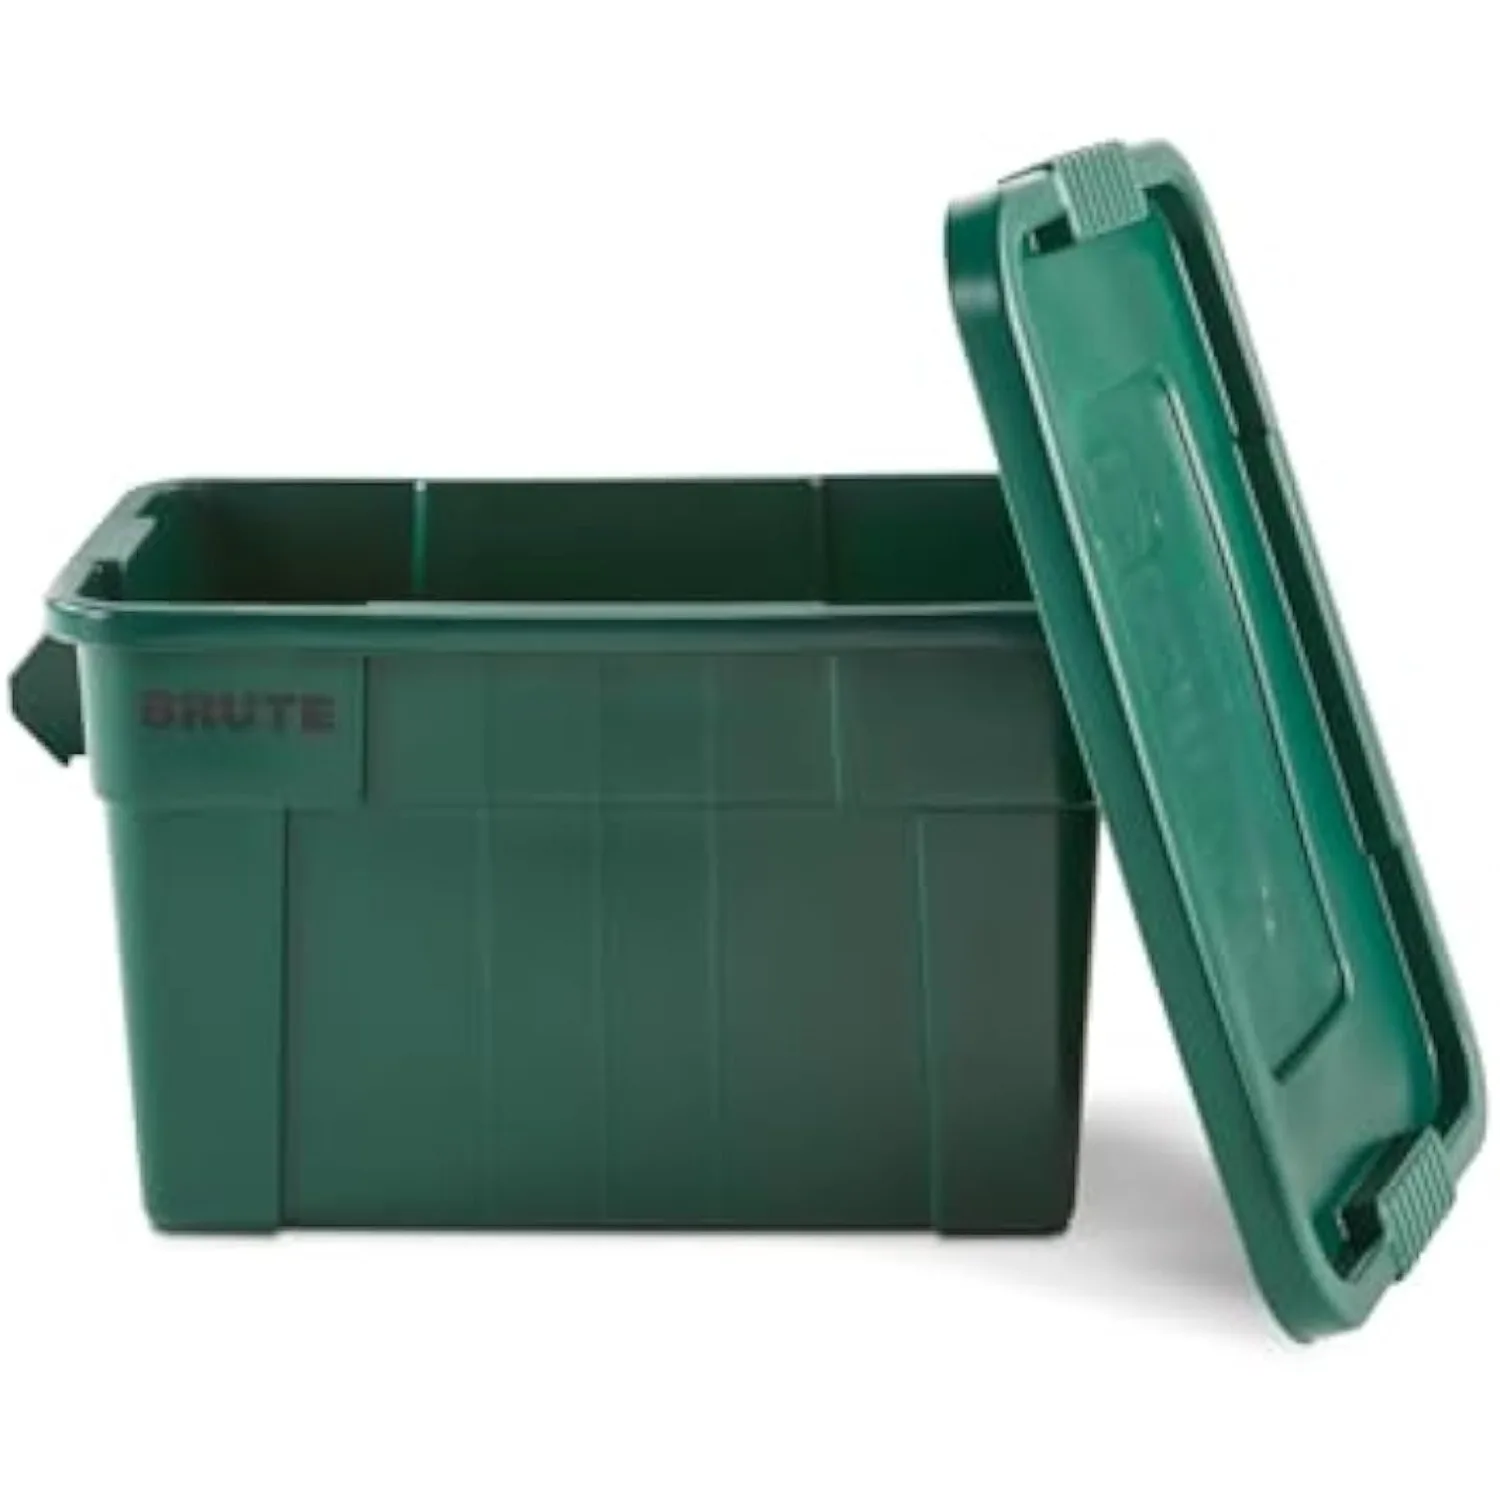 

Tote Storage Container with Lid-Included, 20-Gallon, Dark Green, Rugged/Reusable Boxes for Moving/Camping/Storing